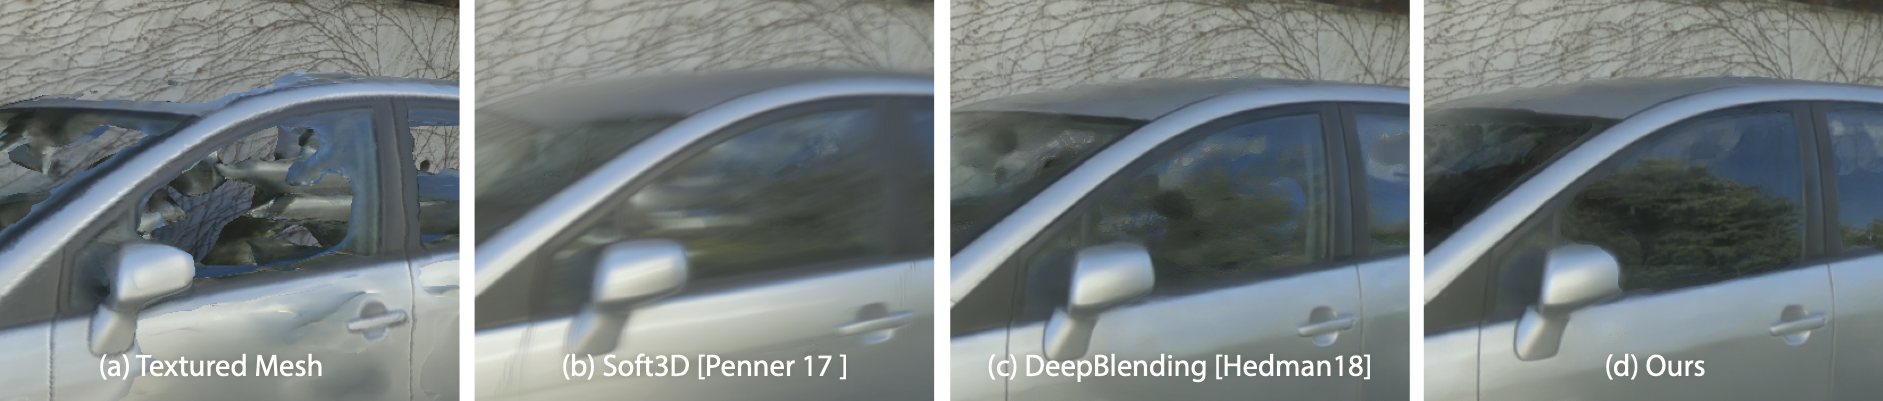 We propose a new solution for rendering captured cars, and in particular their reflective, semi-transparent windows.
A textured mesh from multi-view stereo reconstruction (a) is missing the window geometry. Recent free-viewpoint Image-Based Rendering algorithms (b, c) are not designed to handle the rendering of both the reflection of blue sky, green leaves and the transmissive content (car interior). Our method (d) handles this by computing real-time reflection flows on an ellipsoid approximation of the curved window surface, based on our estimate of a smooth hull of the car that exploit semantic labels in the input images.